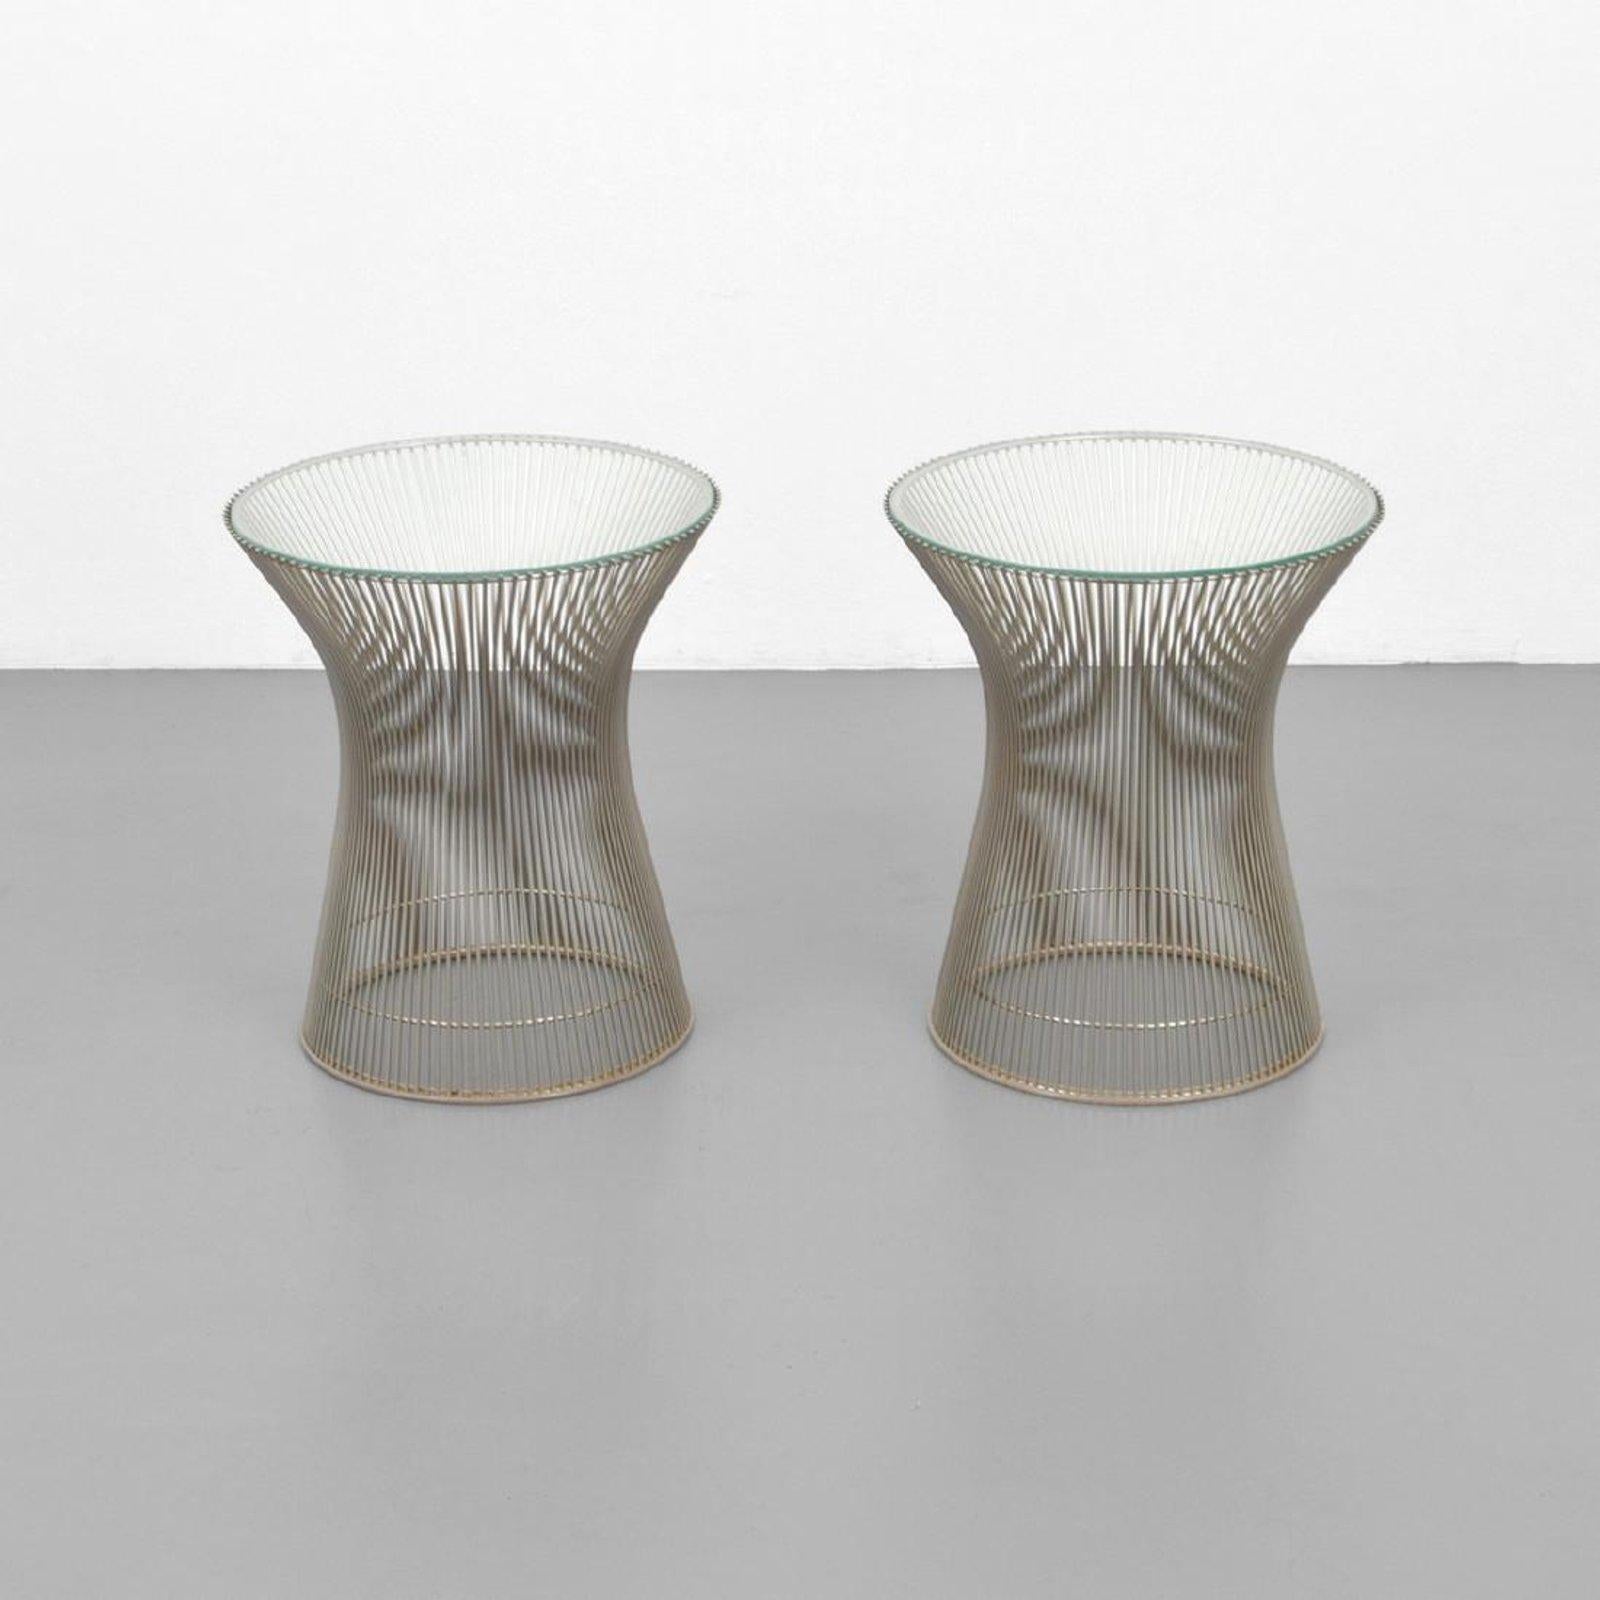 American Chrome and Glass Side or End Tables by Warren Platner for Knoll, USA, 1970s